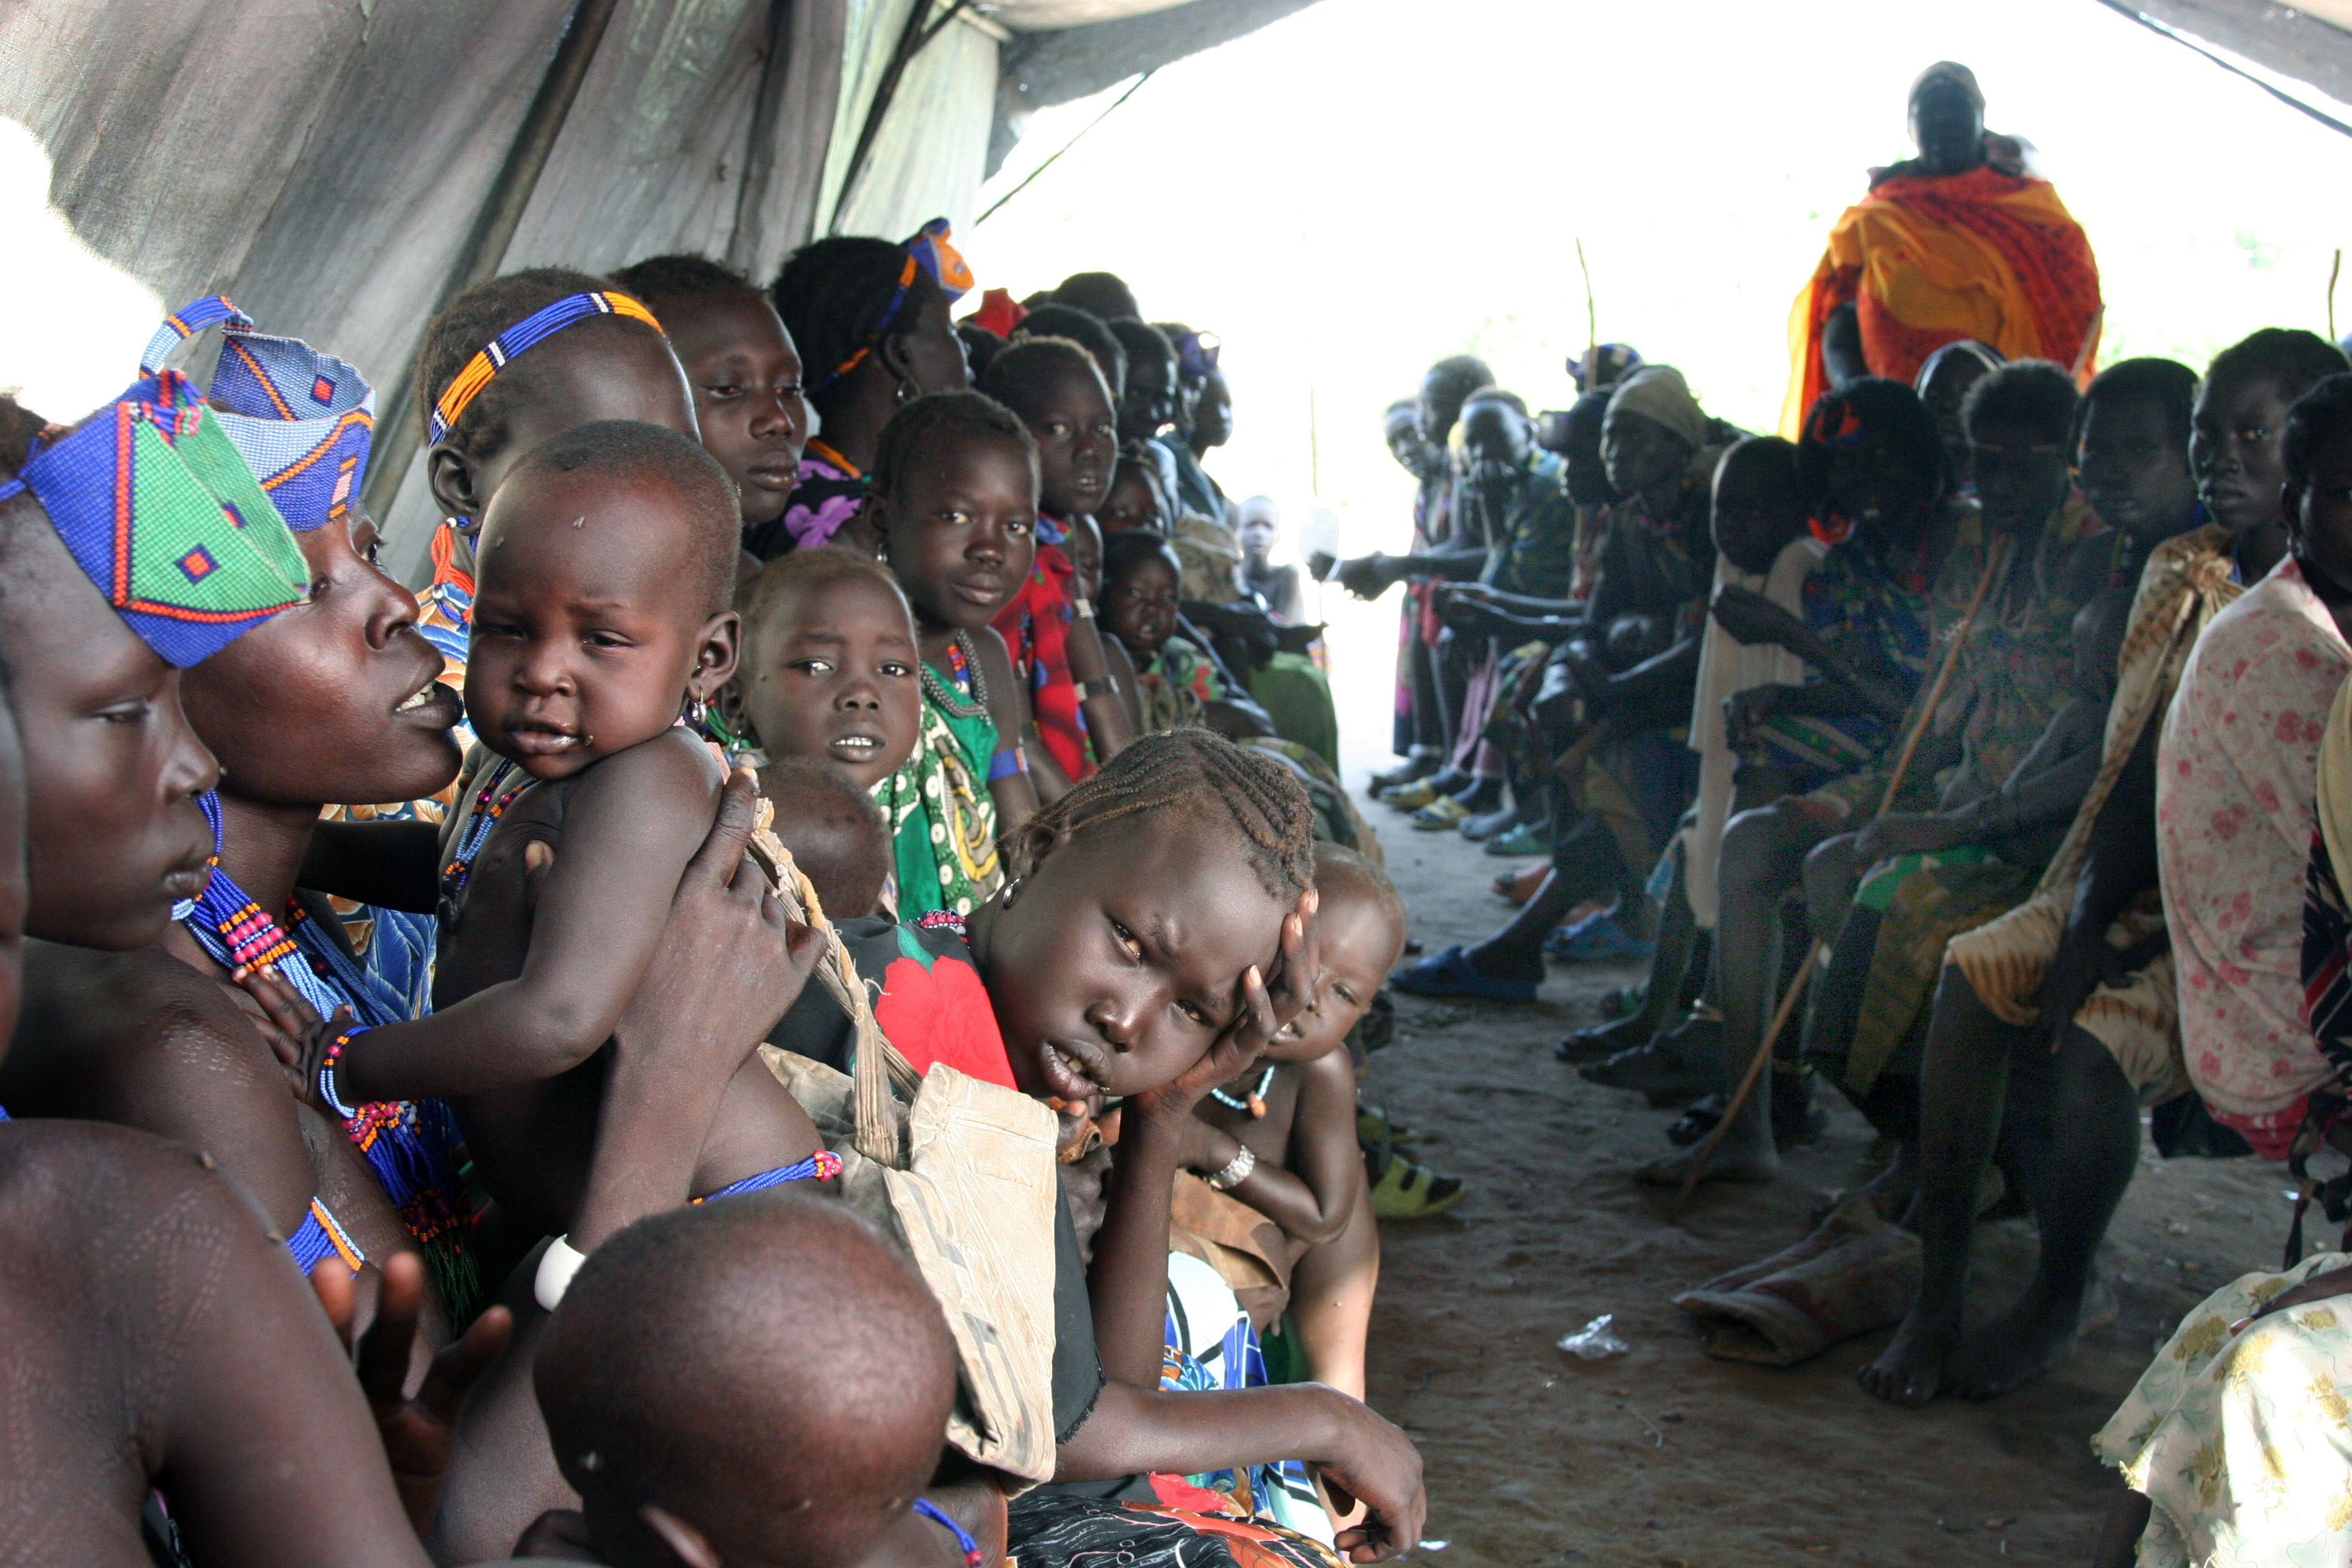 Conditions In South Sudan Worsen With Each Passing Day